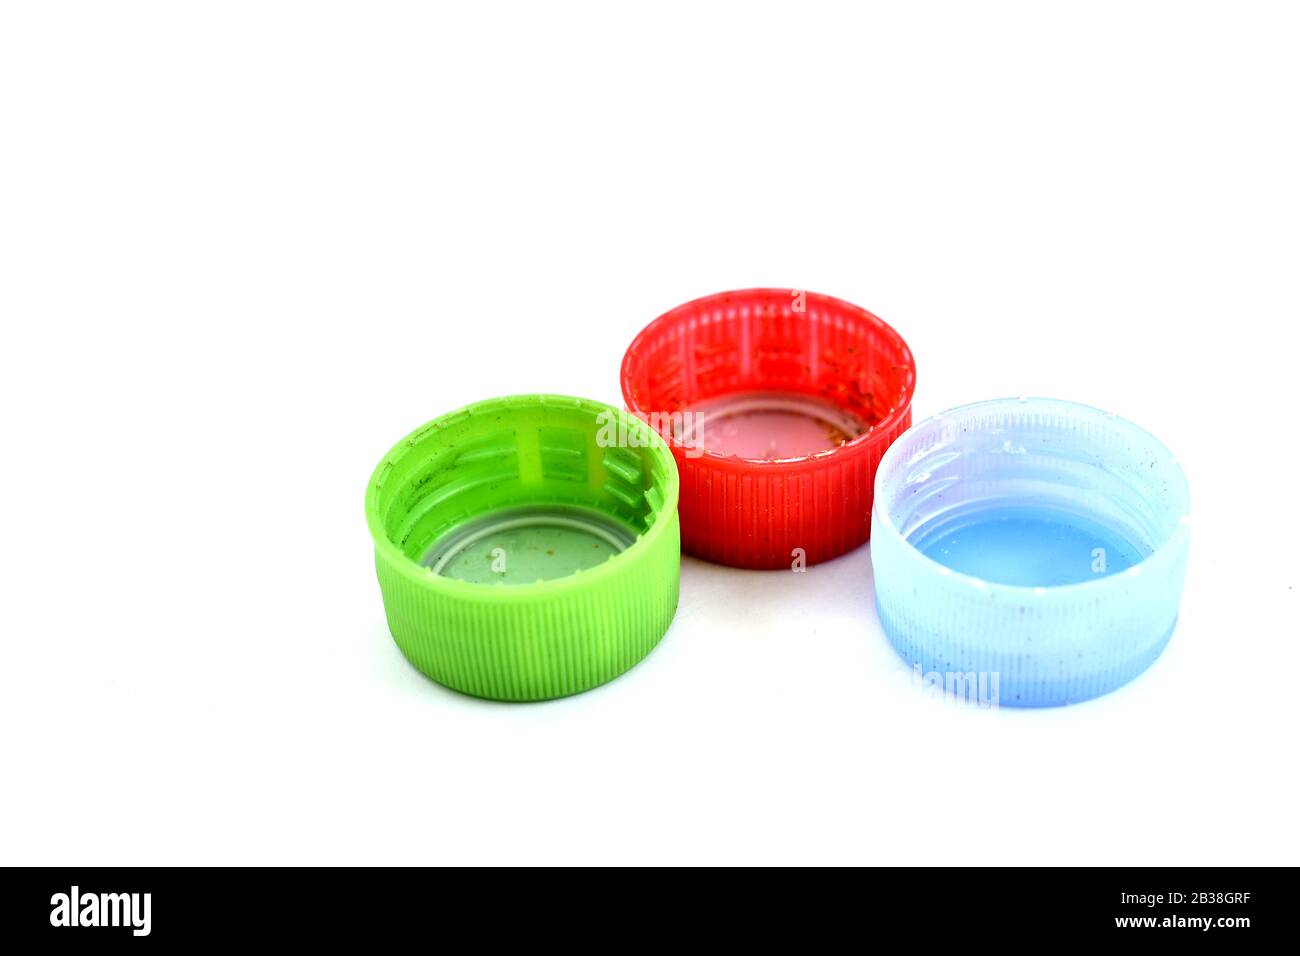 various dirty pet bottle caps on white background Stock Photo - Alamy